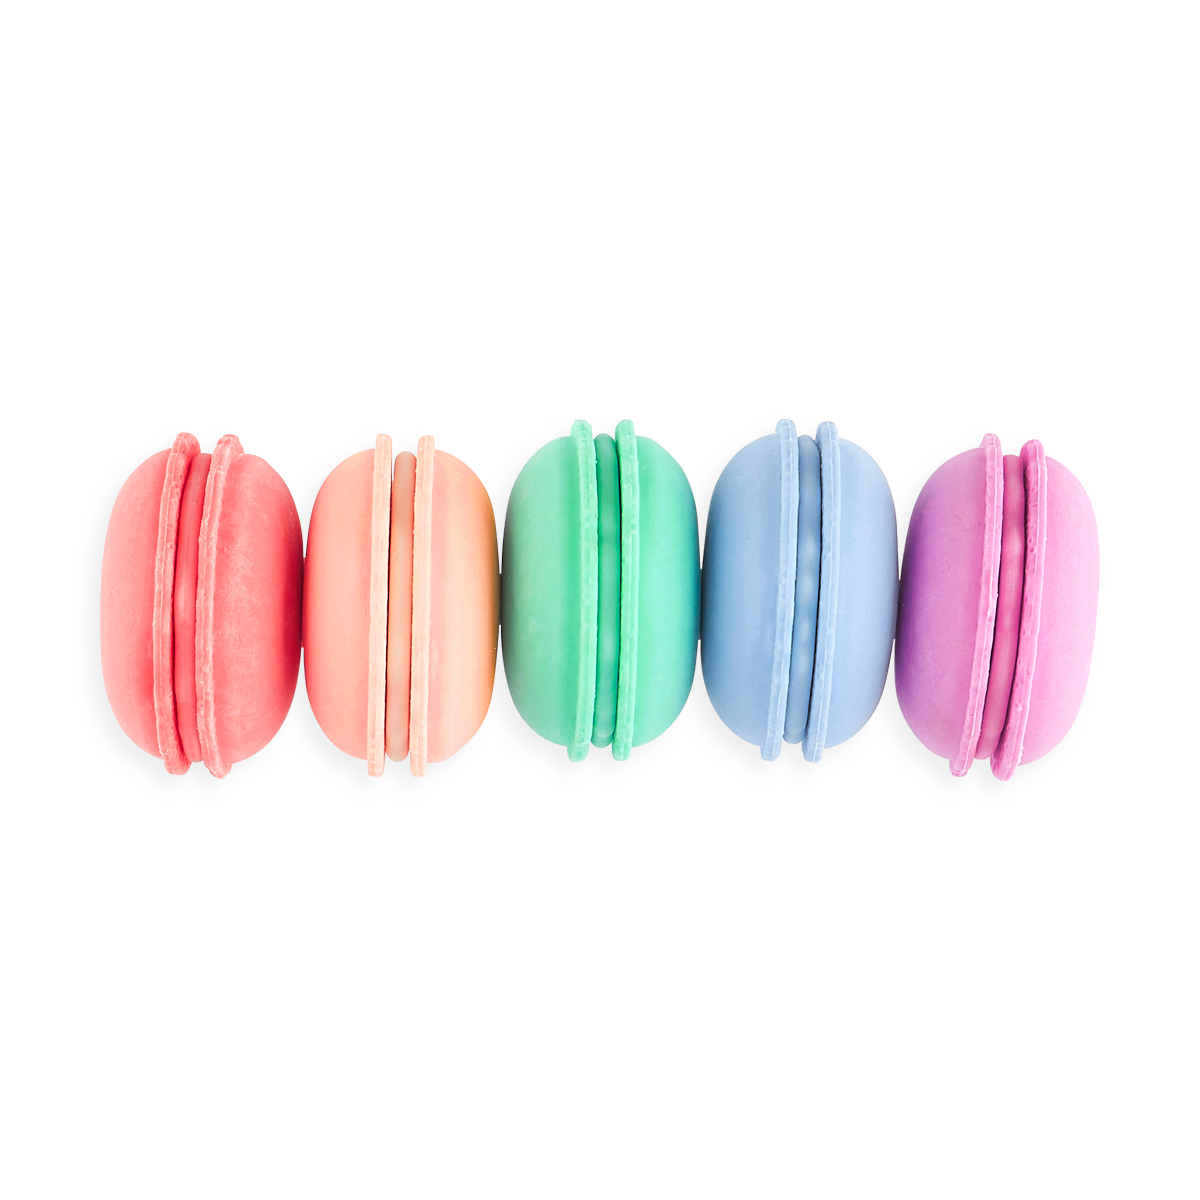 Le Macaron Patisserie Scented Erasers lined up side by side